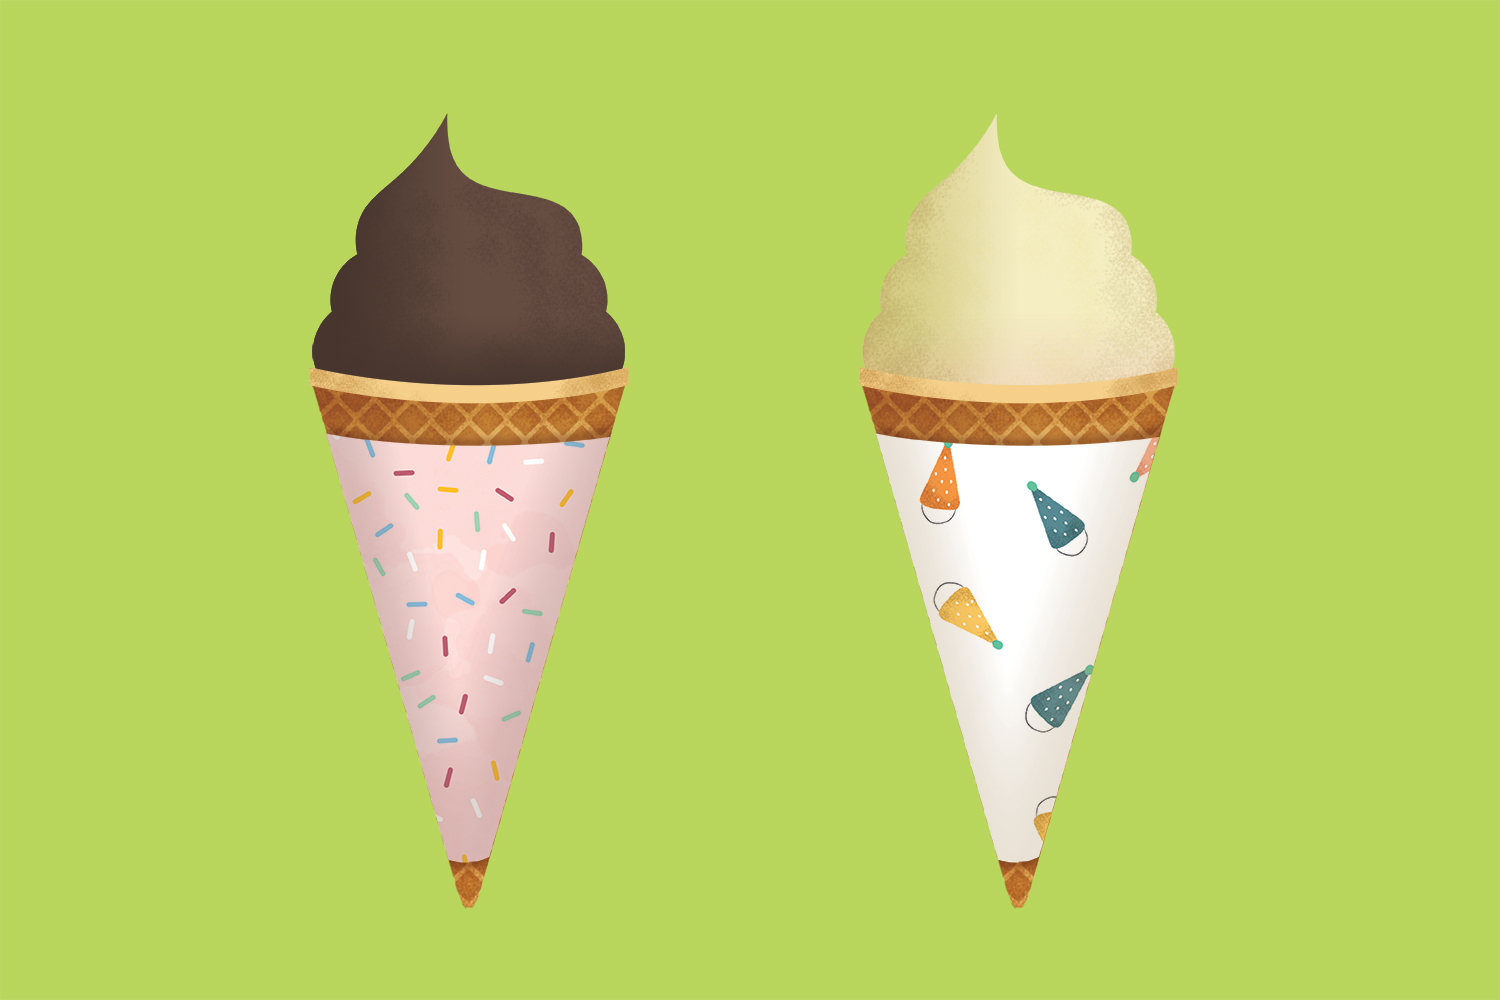 birthday ice cream cone wrappers on green